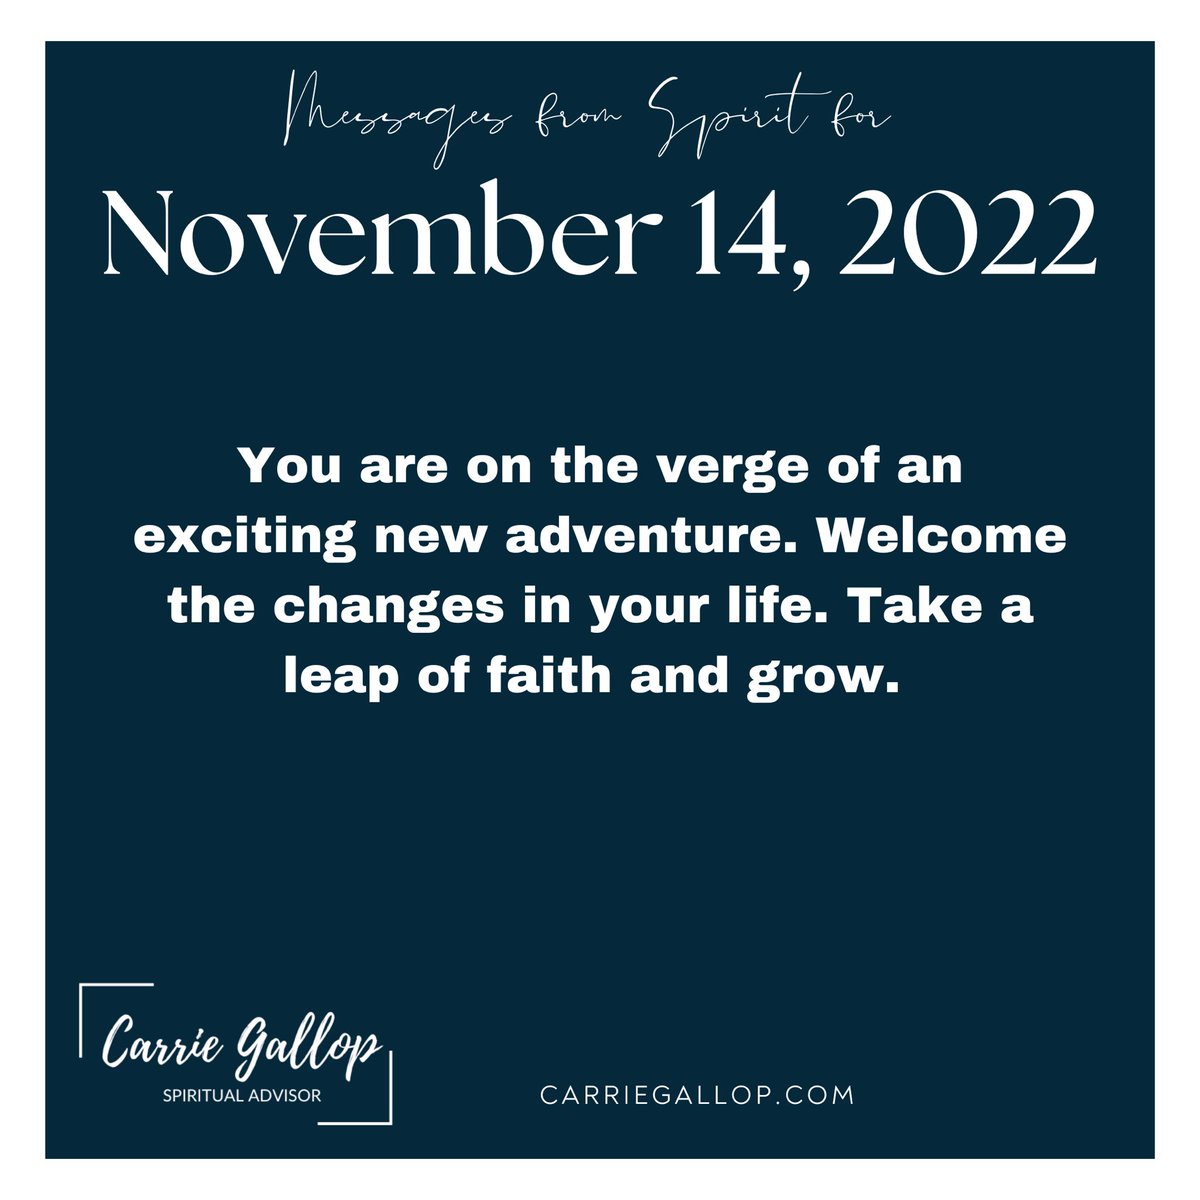 Messages From Spirit for November 14, 2022 ✨

#Daily #Guidance #Message #MessagesFromSpirit #November14 #Nov14 #Exciting #New #Adventure #Welcome #Change #TakeALeapOfFaith #Faith #Grow